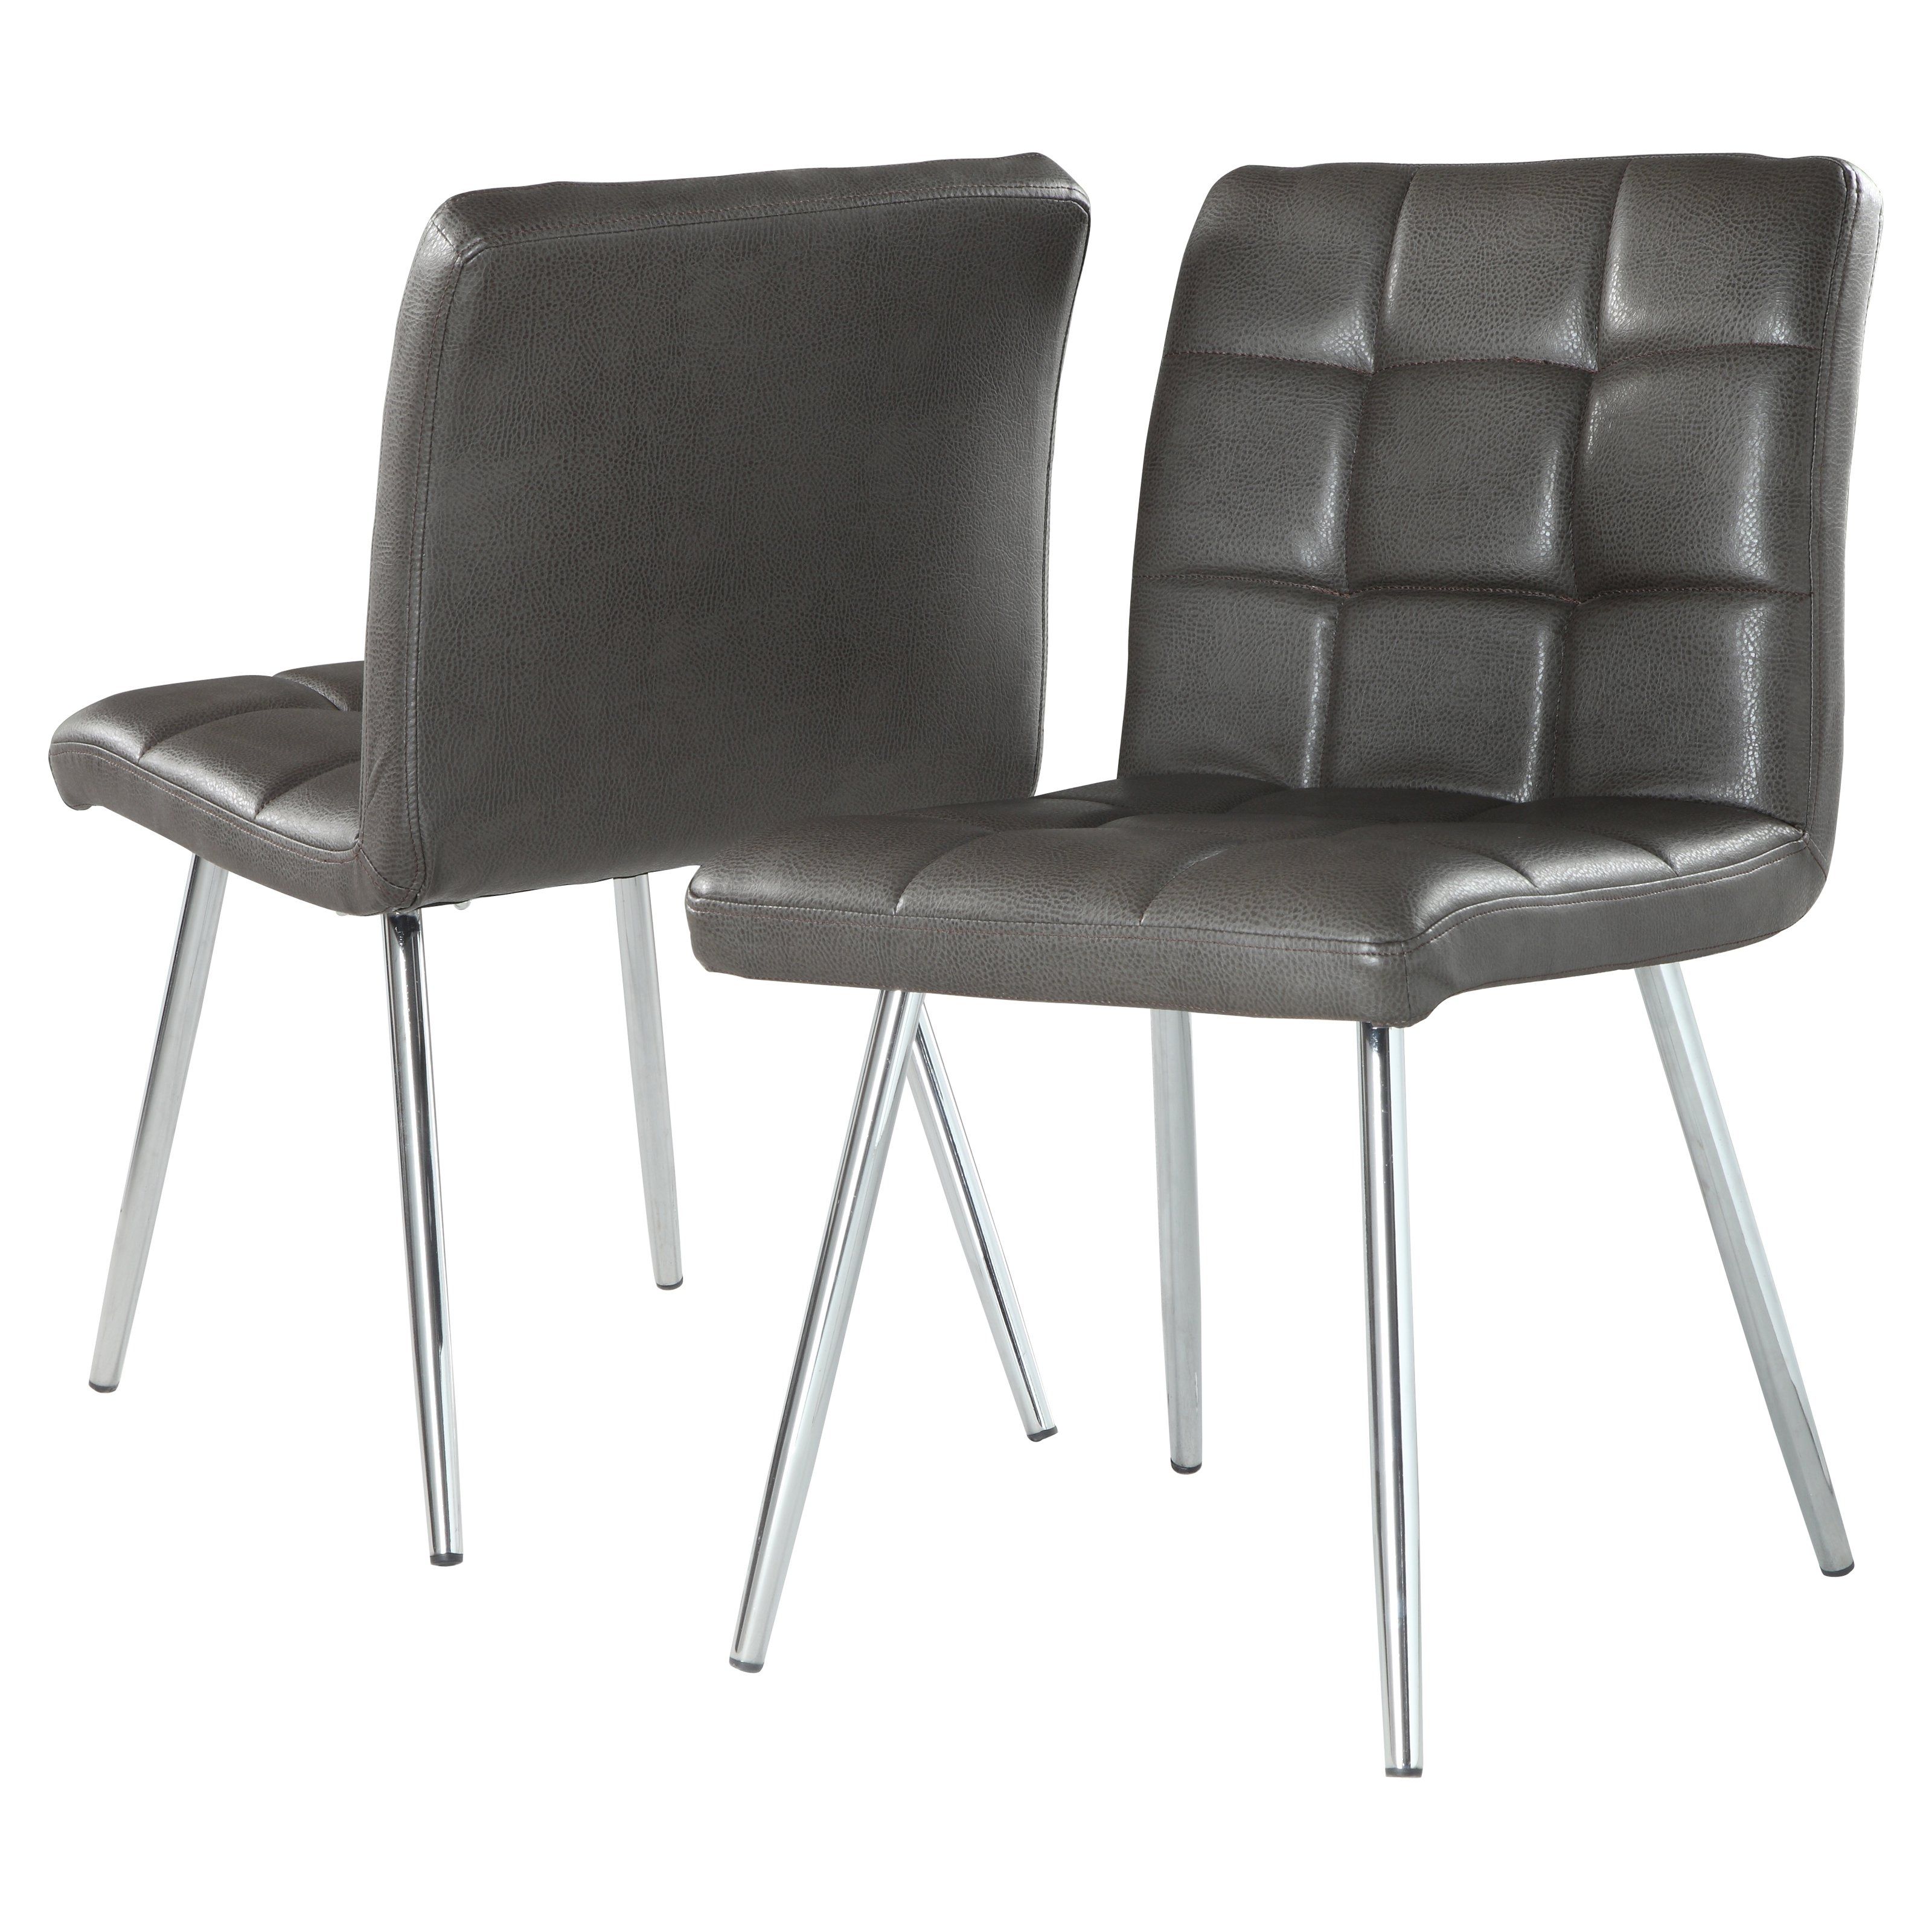 Chrome Leather Dining Chairs With Well Liked Monarch Dining Chair 2pcs / 32"h / Grey Leatherlook / Chrome (View 7 of 25)